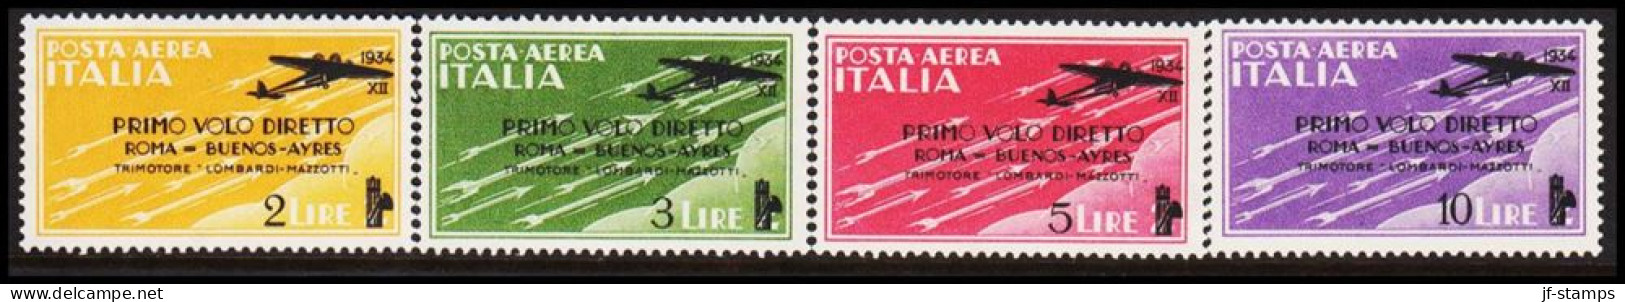 1934. ITALIANA. First Flight Rom-Buenos Aires. Complete Set With 4 Fine Stamps. No Gum. (Michel 459-462) - JF544900 - Mint/hinged